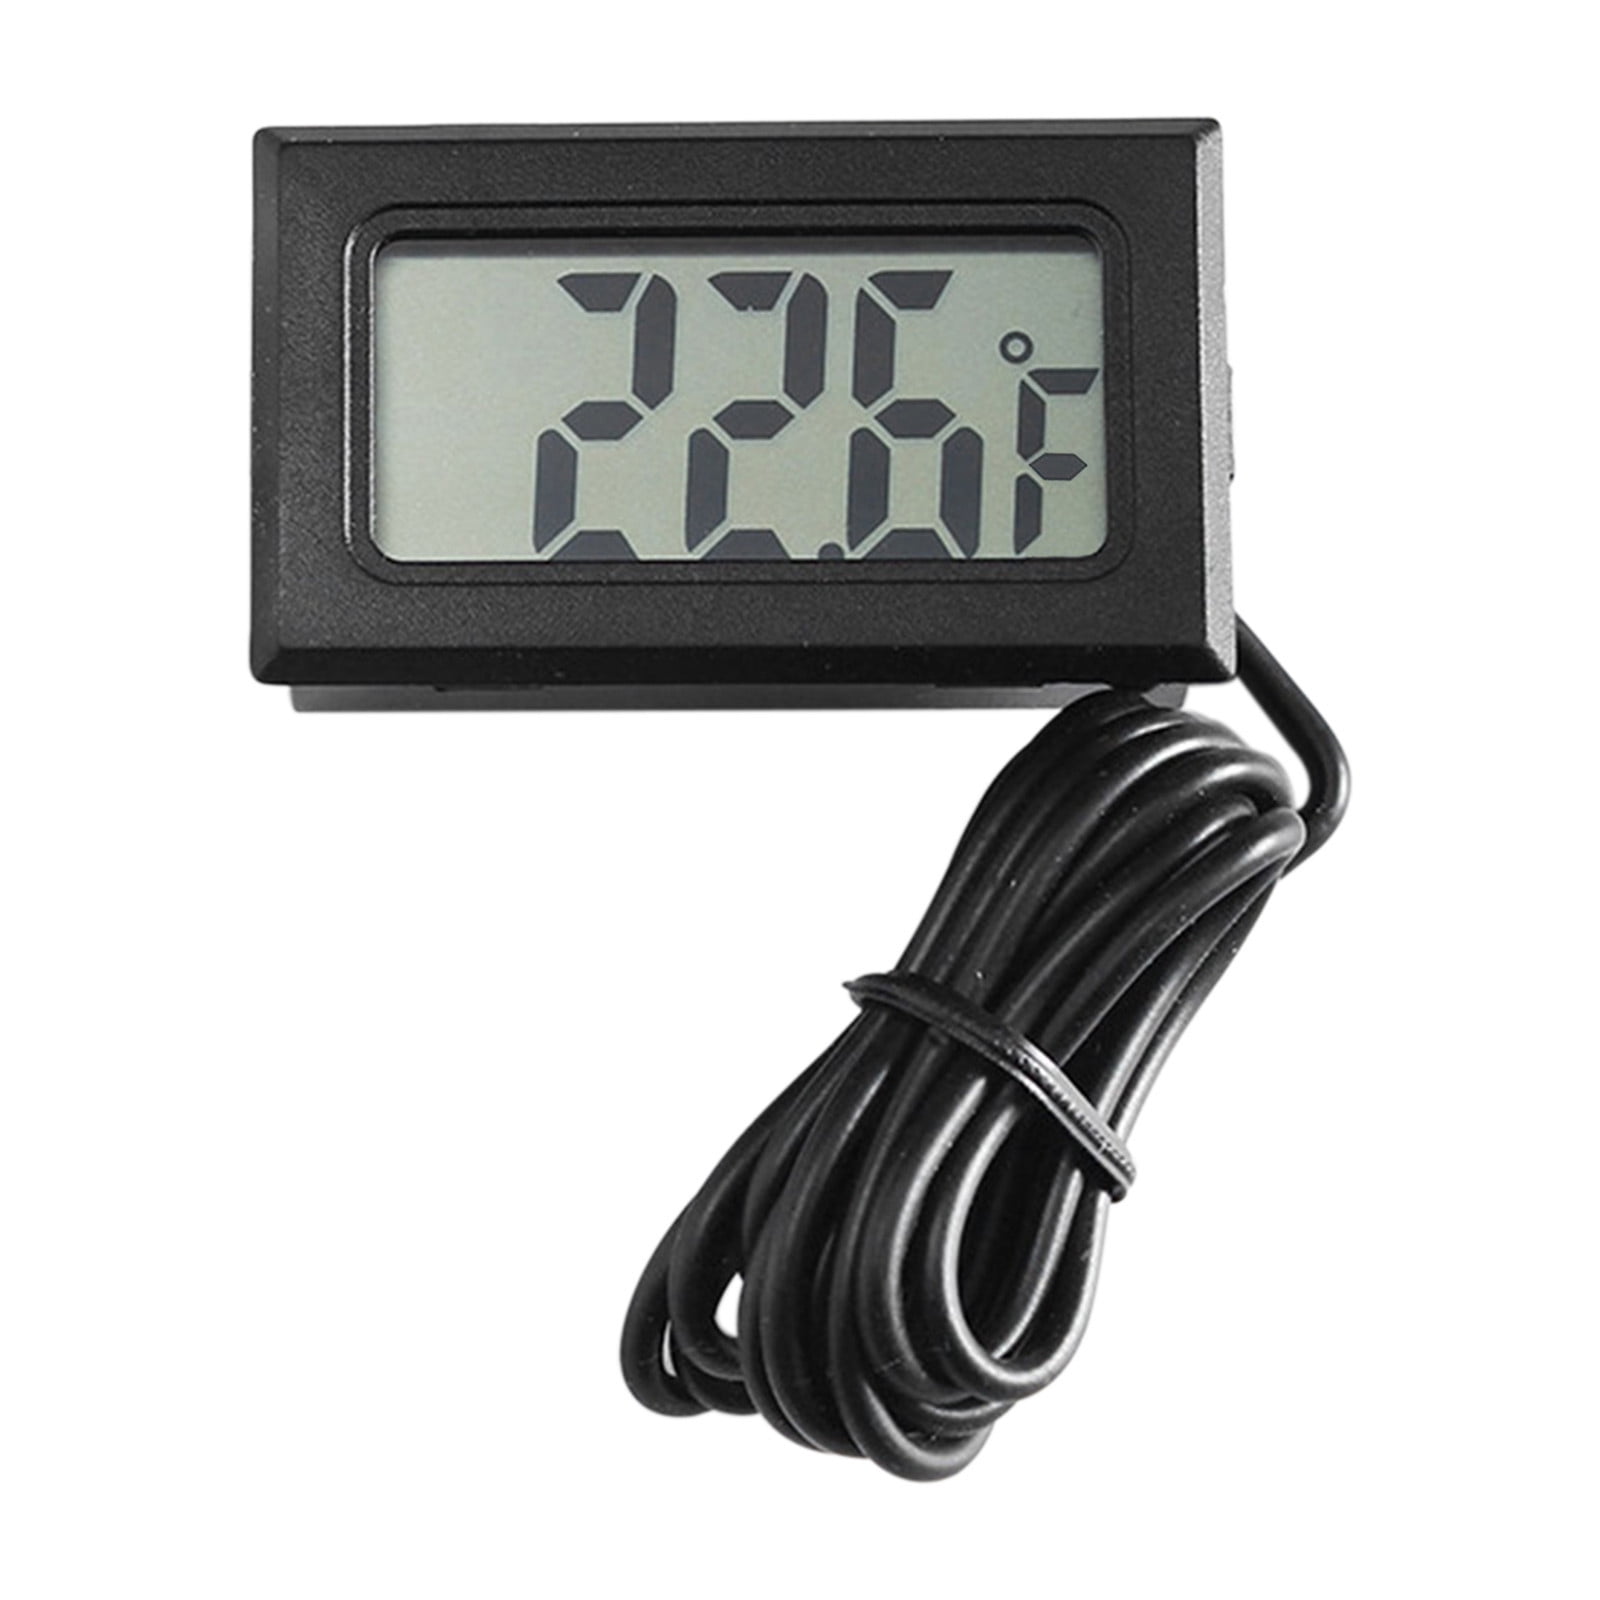 Mini Black/White Embedded LED Digital Thermometer Temperature Cooling Tester 